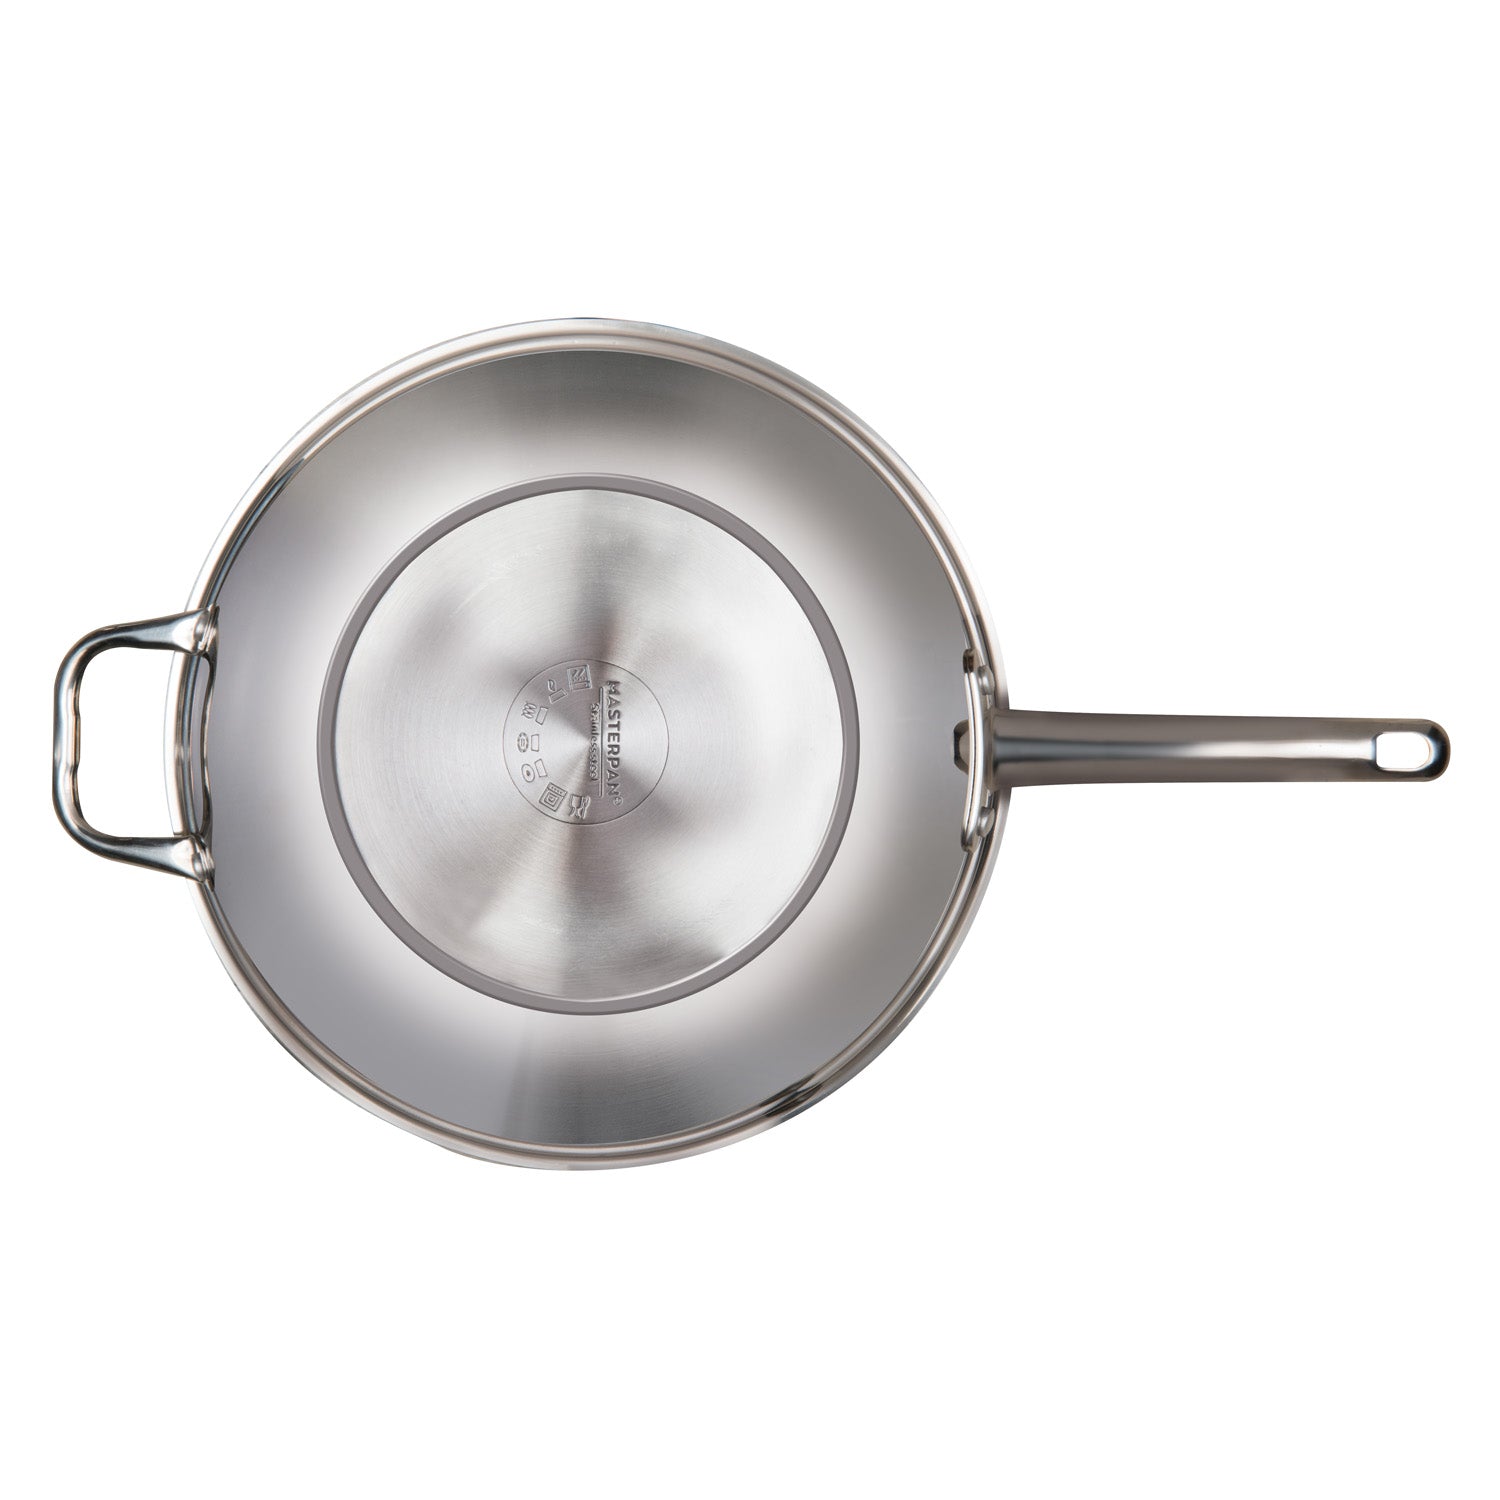 MasterPan Copper Pan 12 in. Non-Stick Wok with Lid